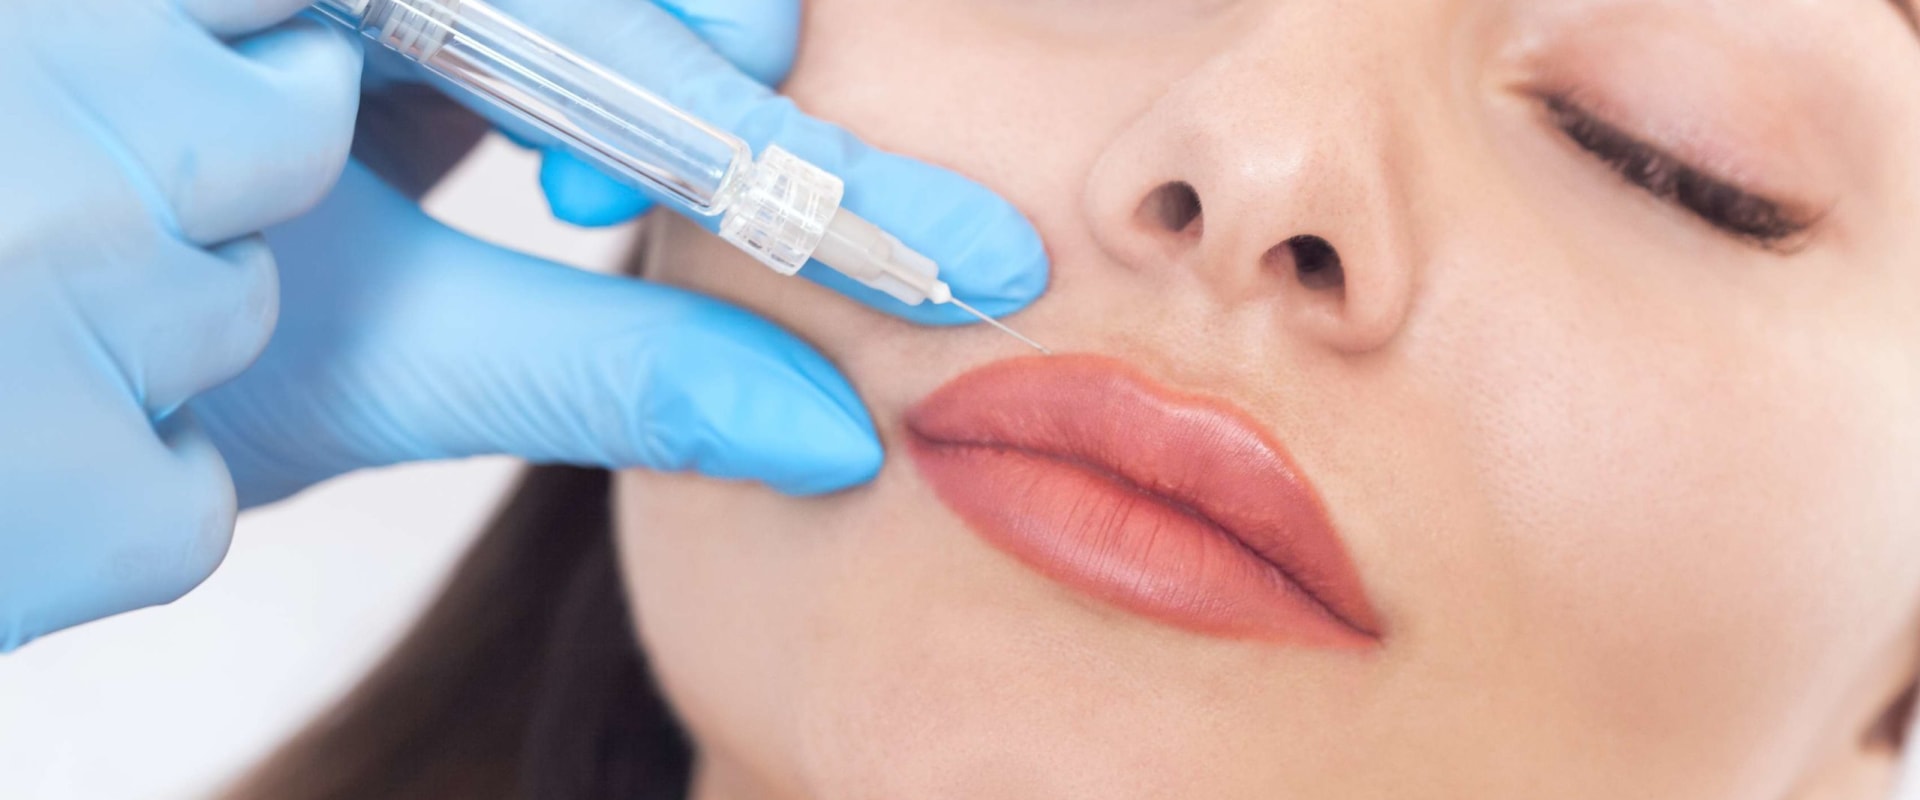 Injectable filler from Medical Weight Loss and Beauty